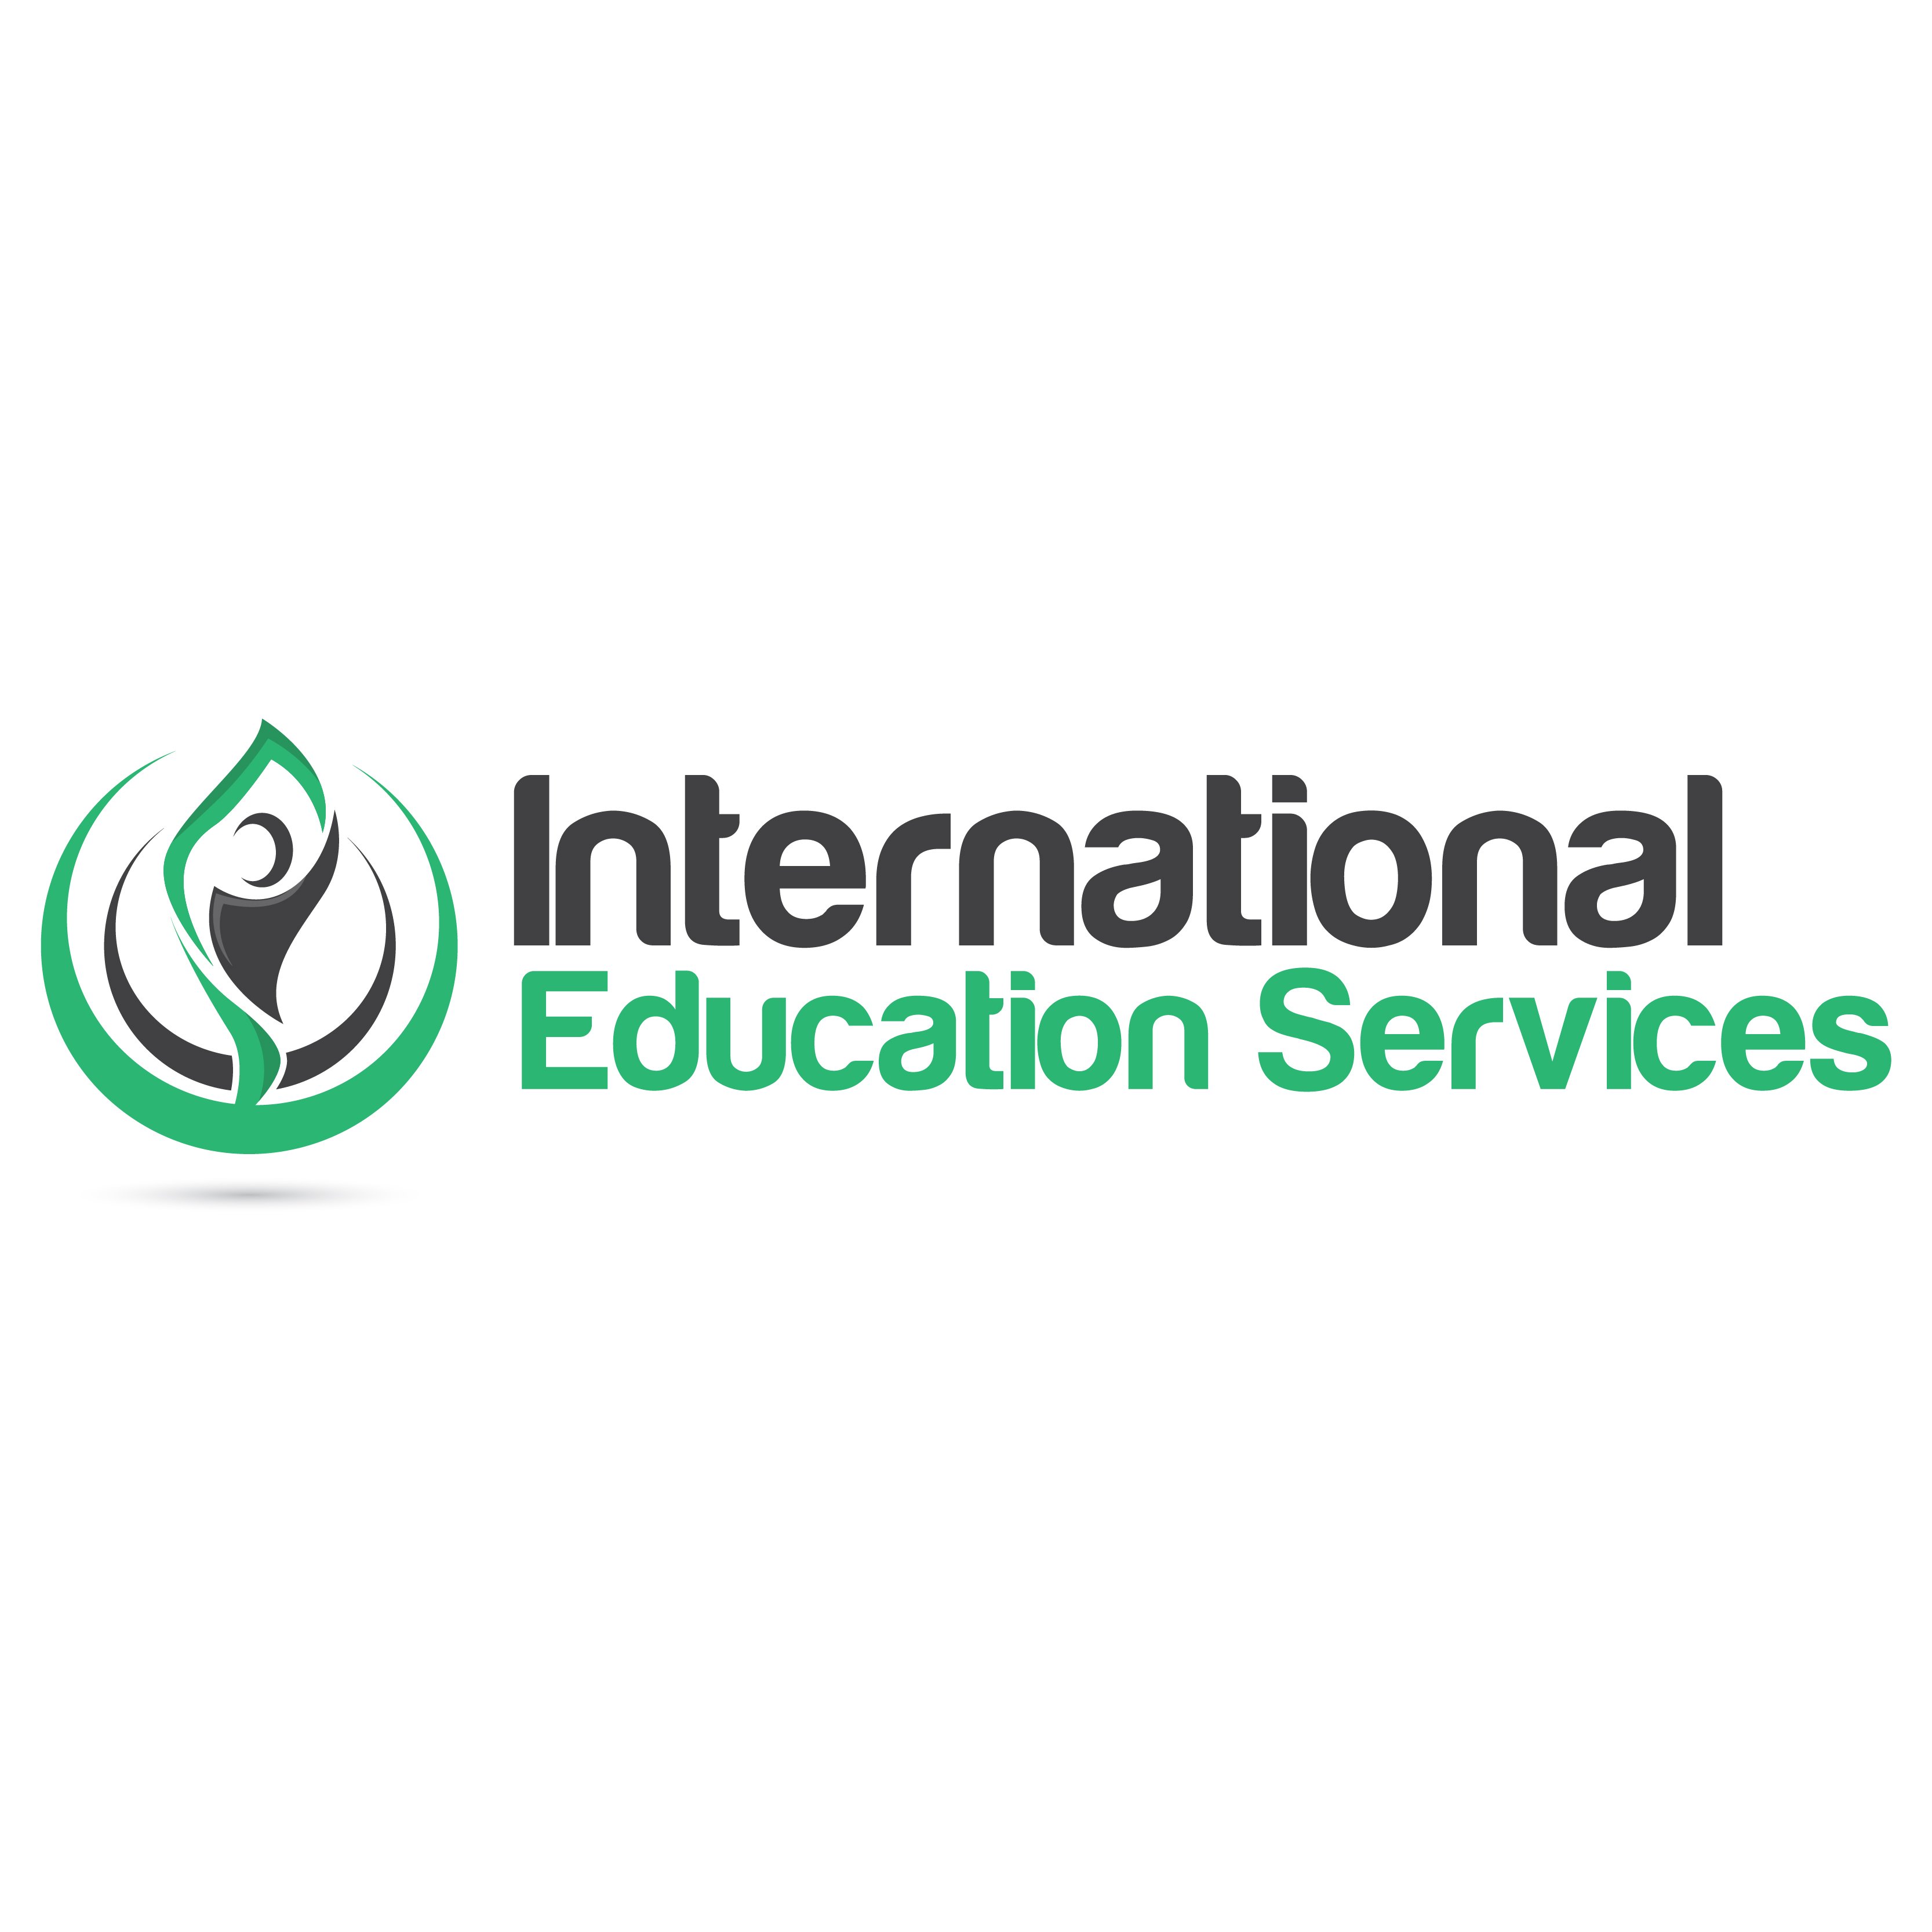 IES facilitates partnerships between international schools and educators through our recruiting services and professional development workshops.